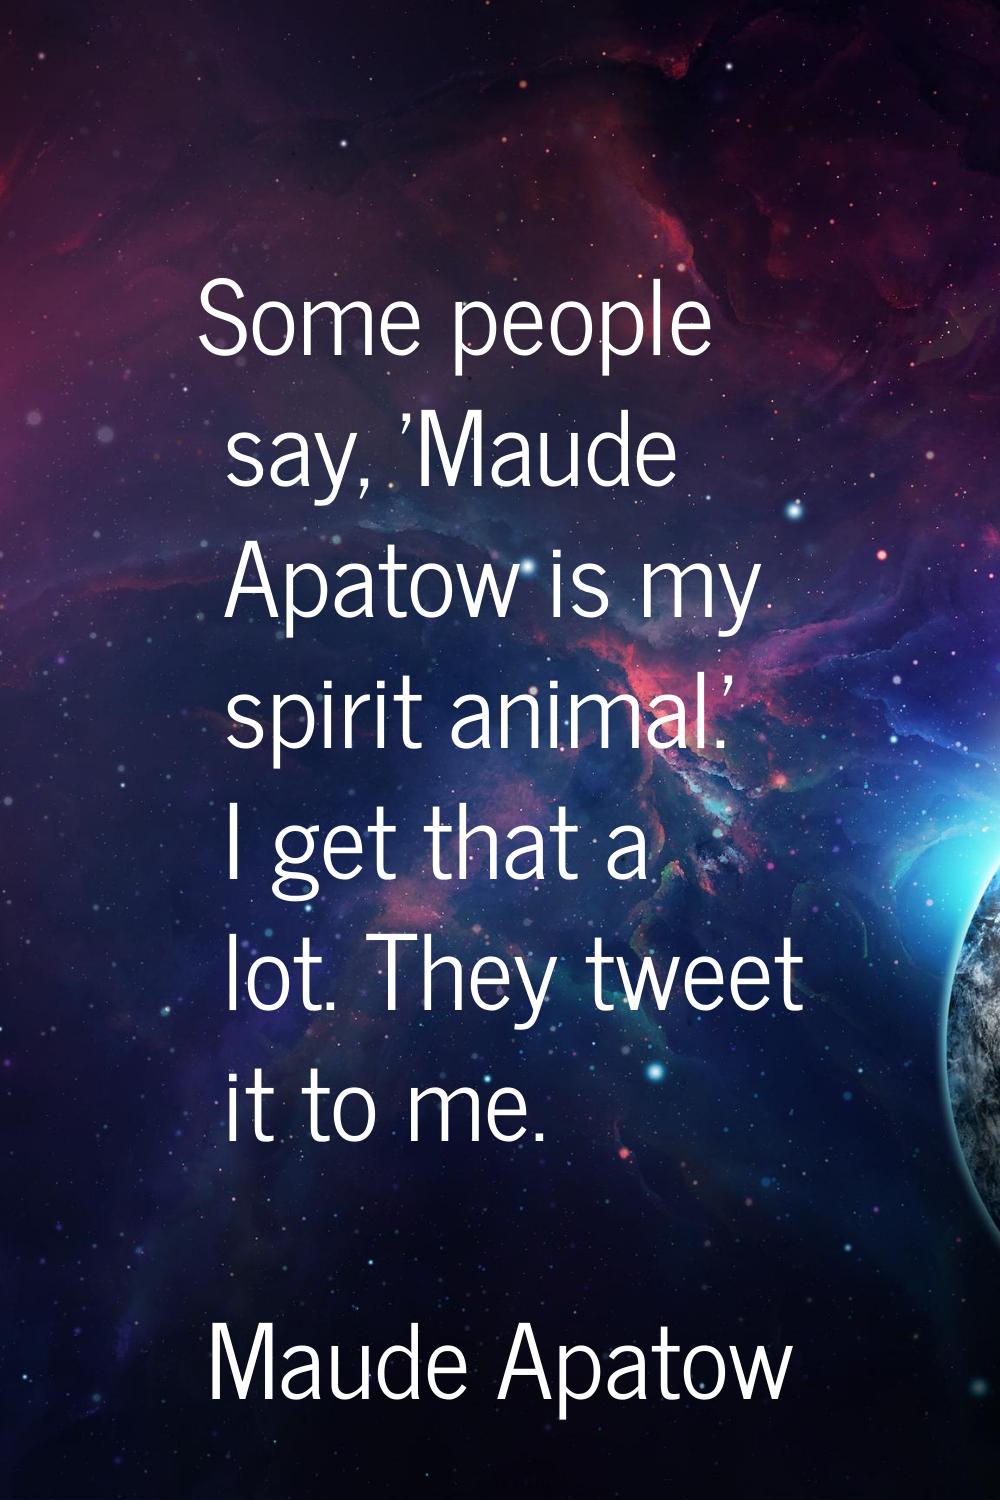 Some people say, 'Maude Apatow is my spirit animal.' I get that a lot. They tweet it to me.